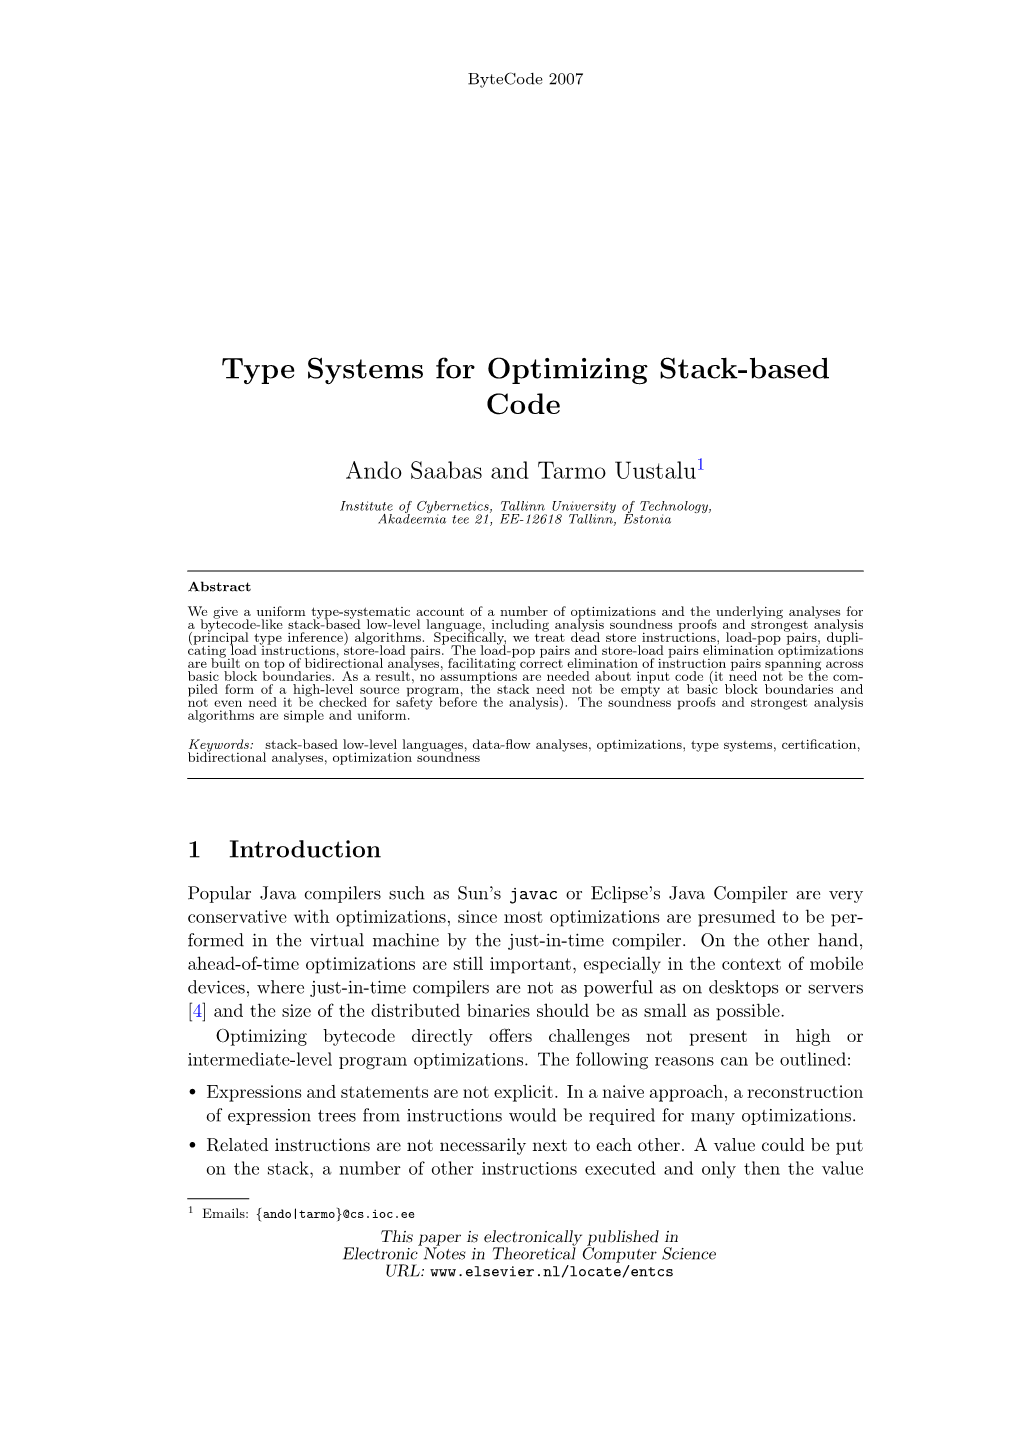 Type Systems for Optimizing Stack-Based Code